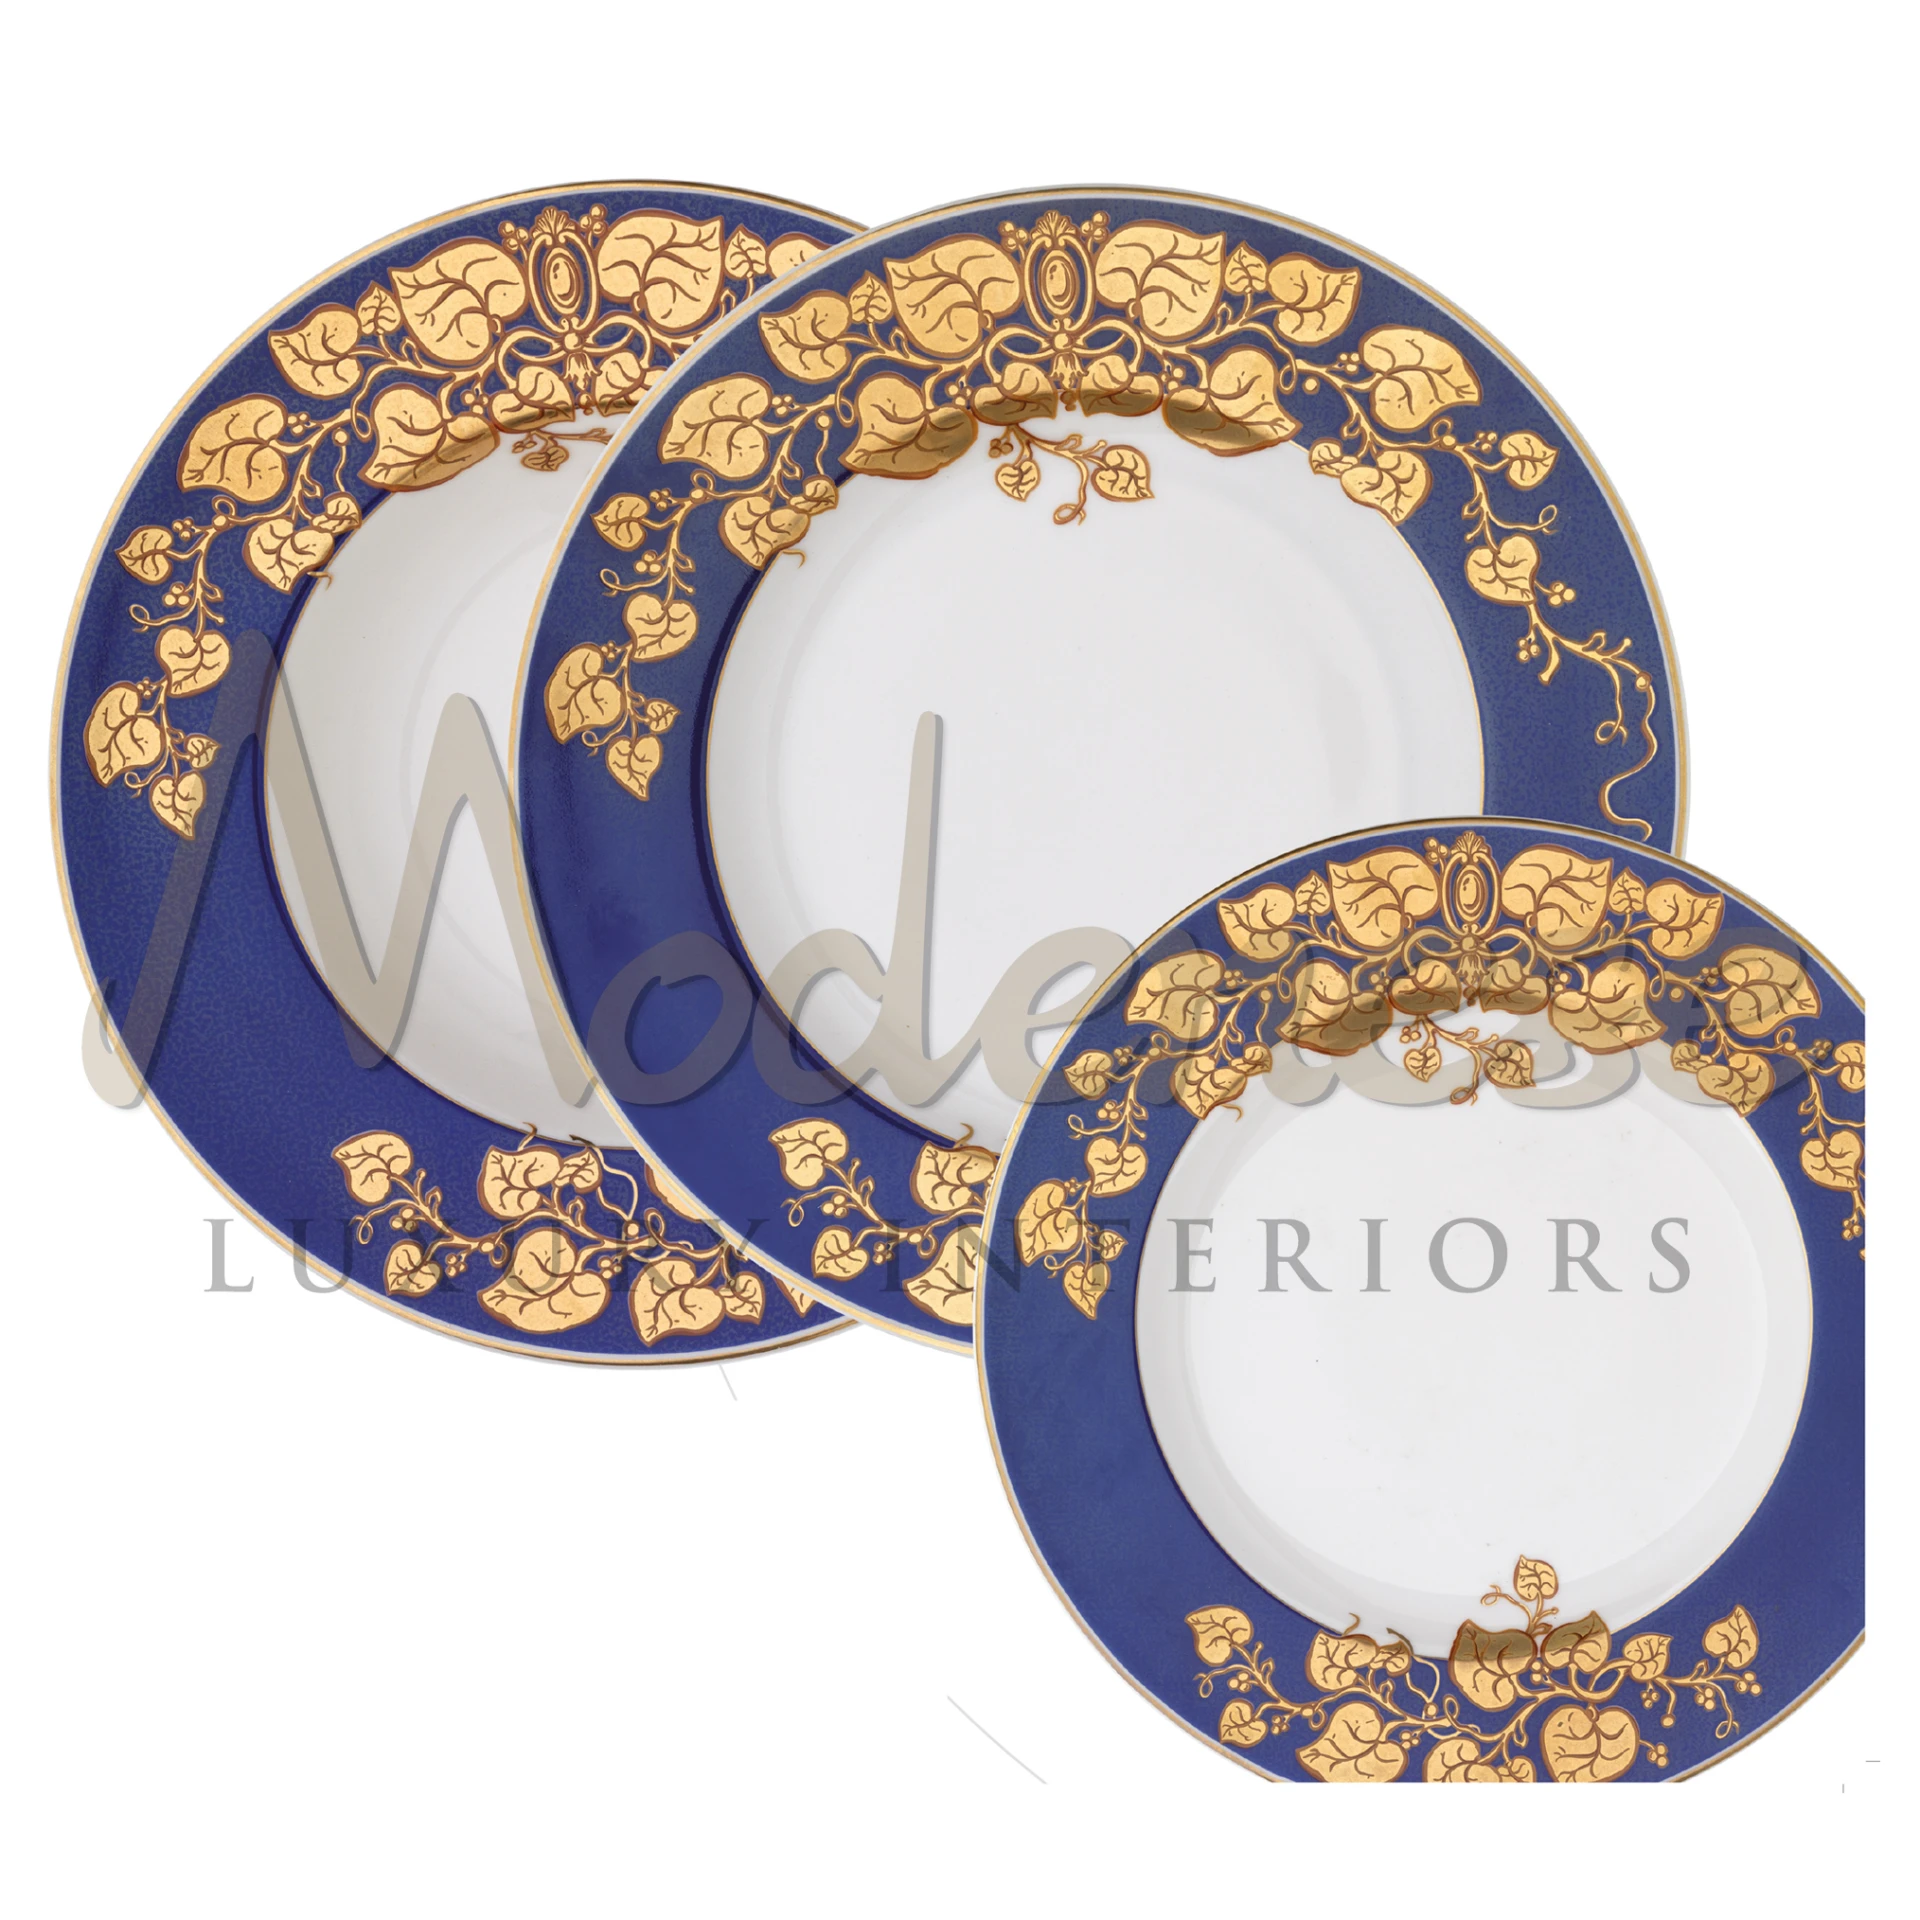 Three decorative plates with blue borders and sophisticated golden floral designs